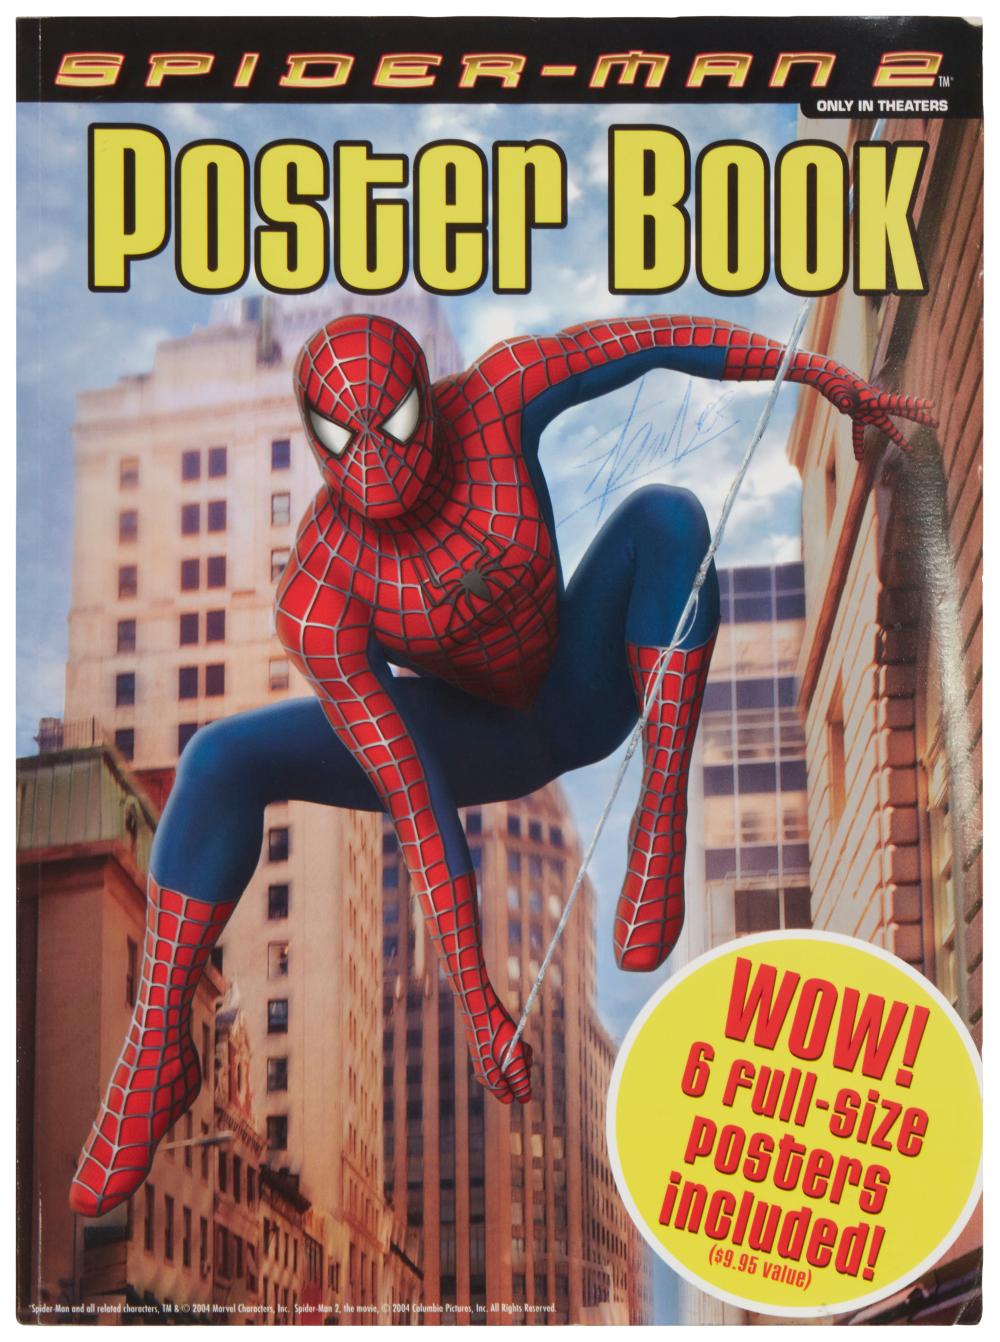 A SPIDER MAN 2 POSTER BOOK SIGNED 30ae3e